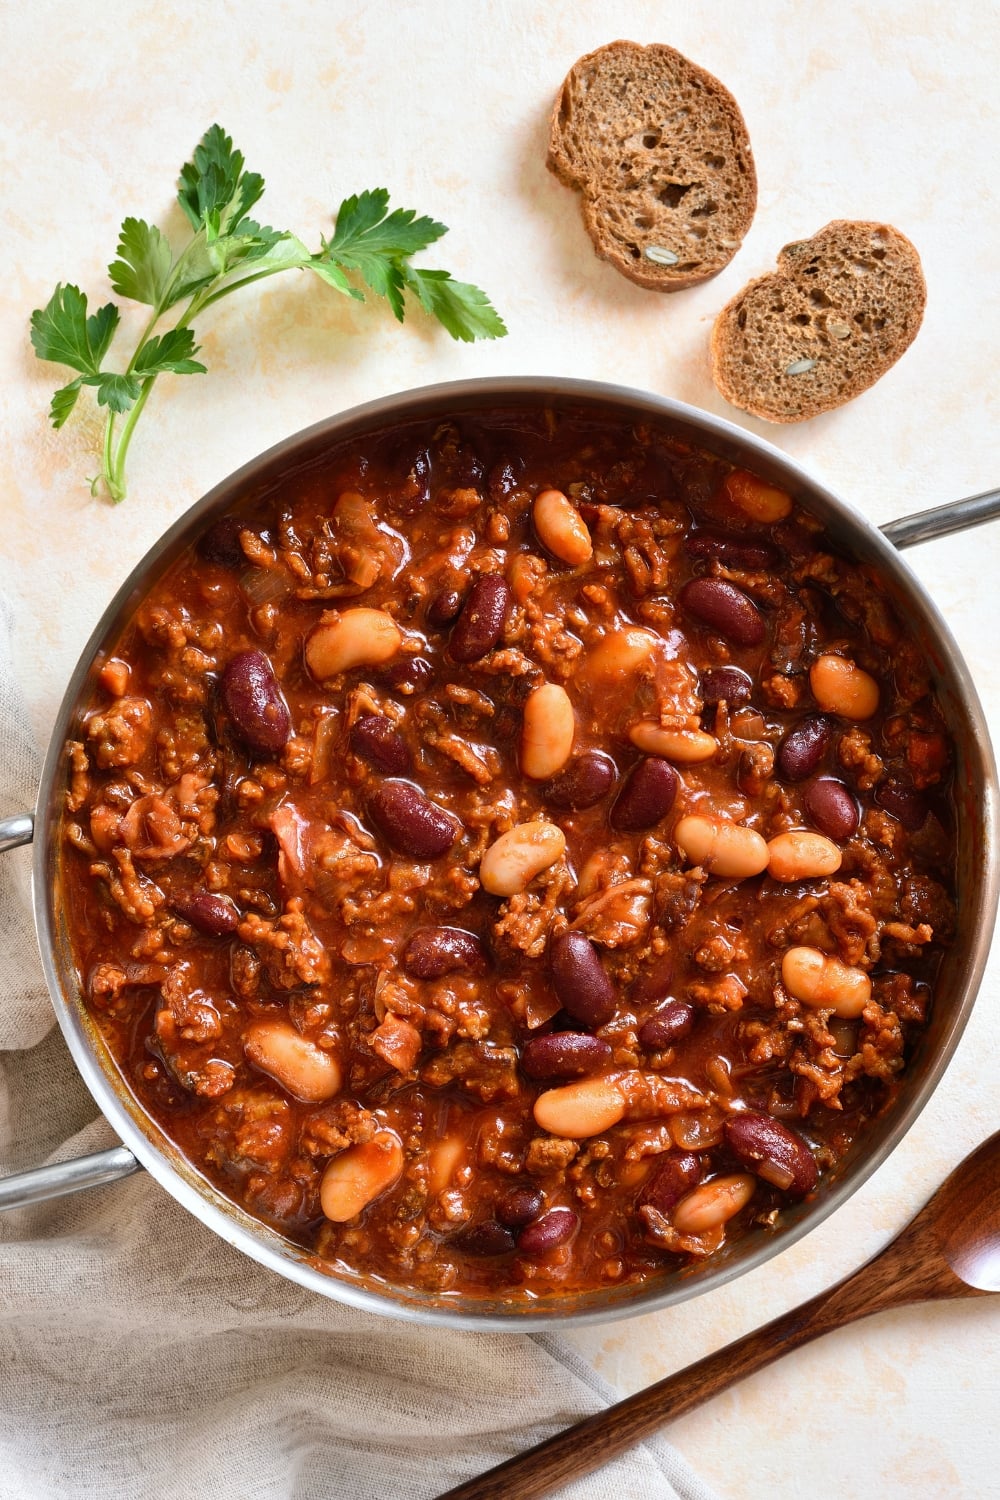 Homecooked Cowboy Beans Served with Bread